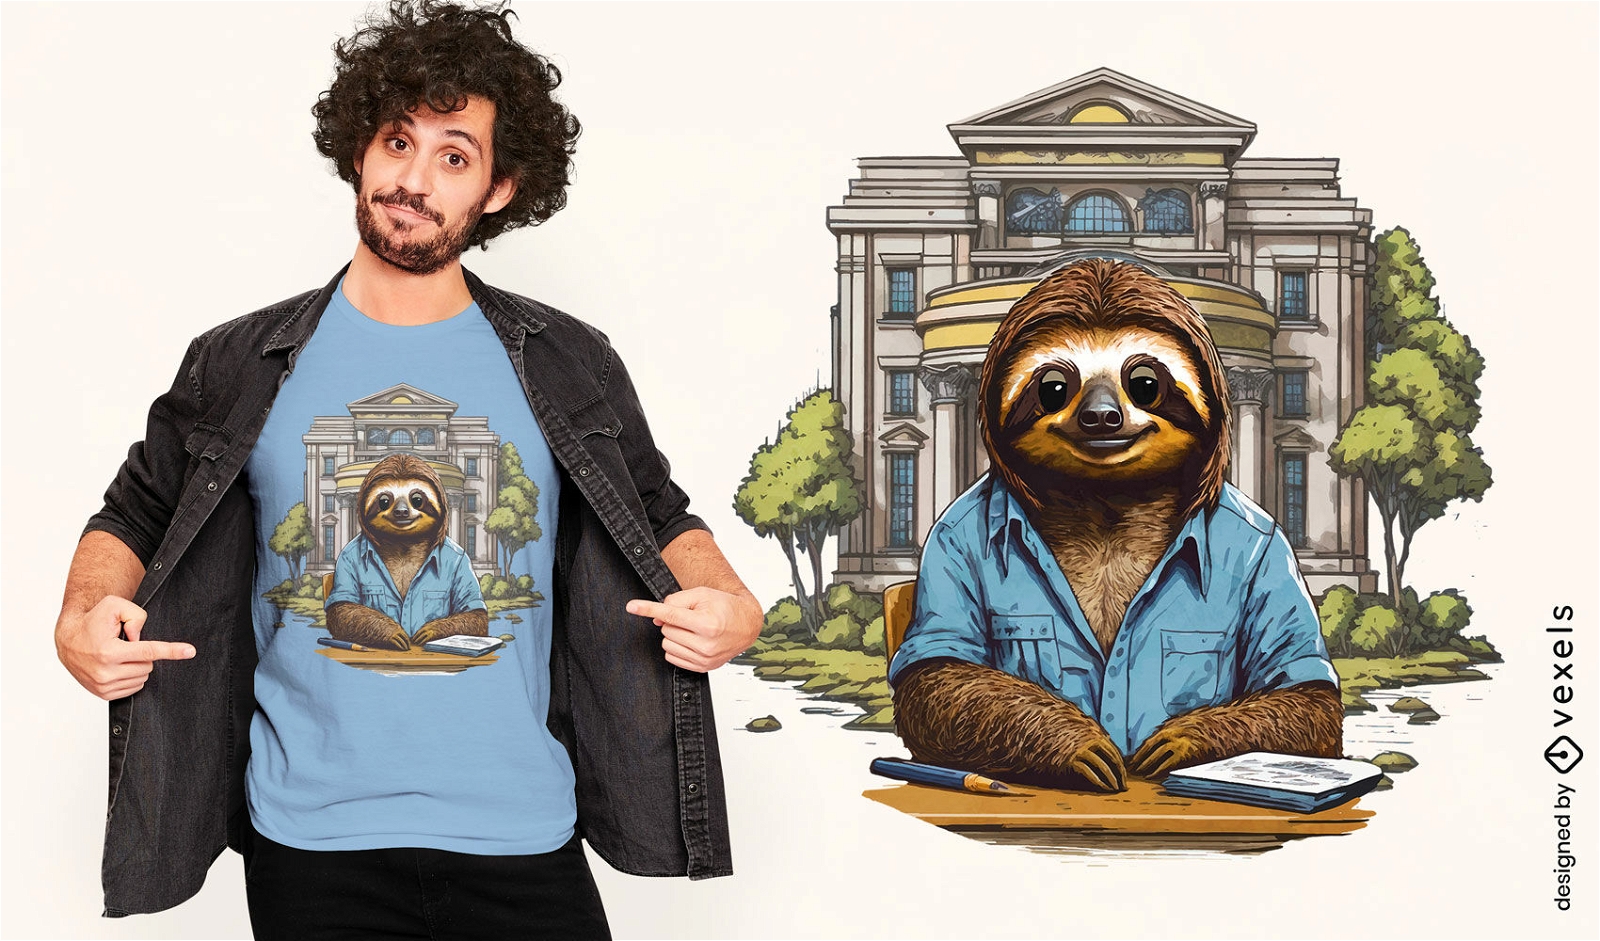 Quirky sloth banker t-shirt design